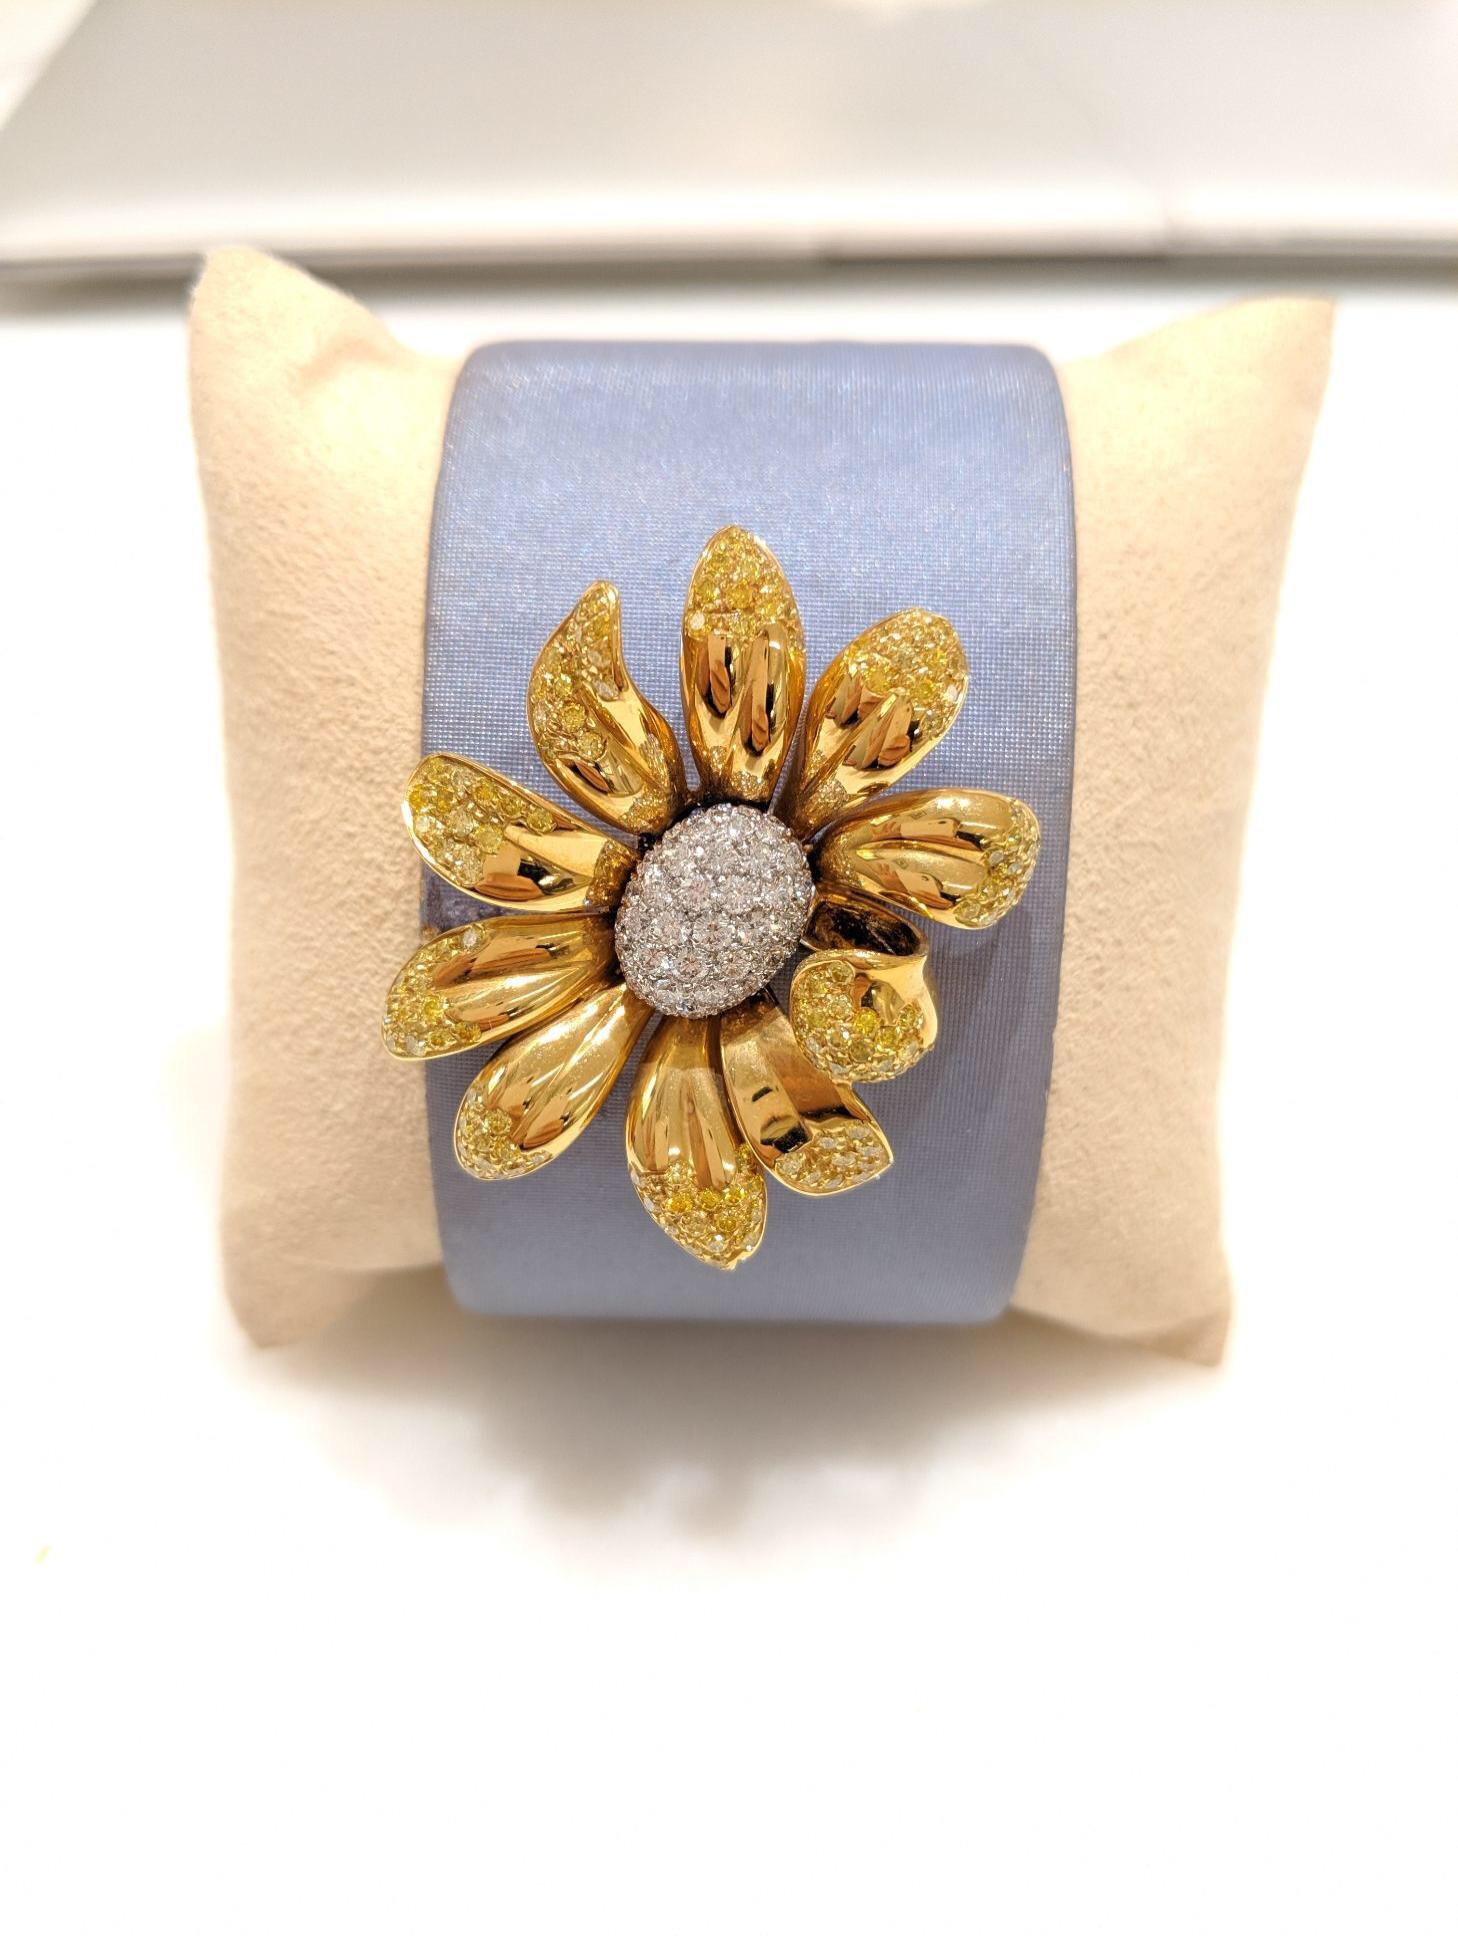 18Kt Gold Daisy Cuff Bracelet with 1.63 Carat Yellow & 1.17 Carat White Diamonds For Sale 1